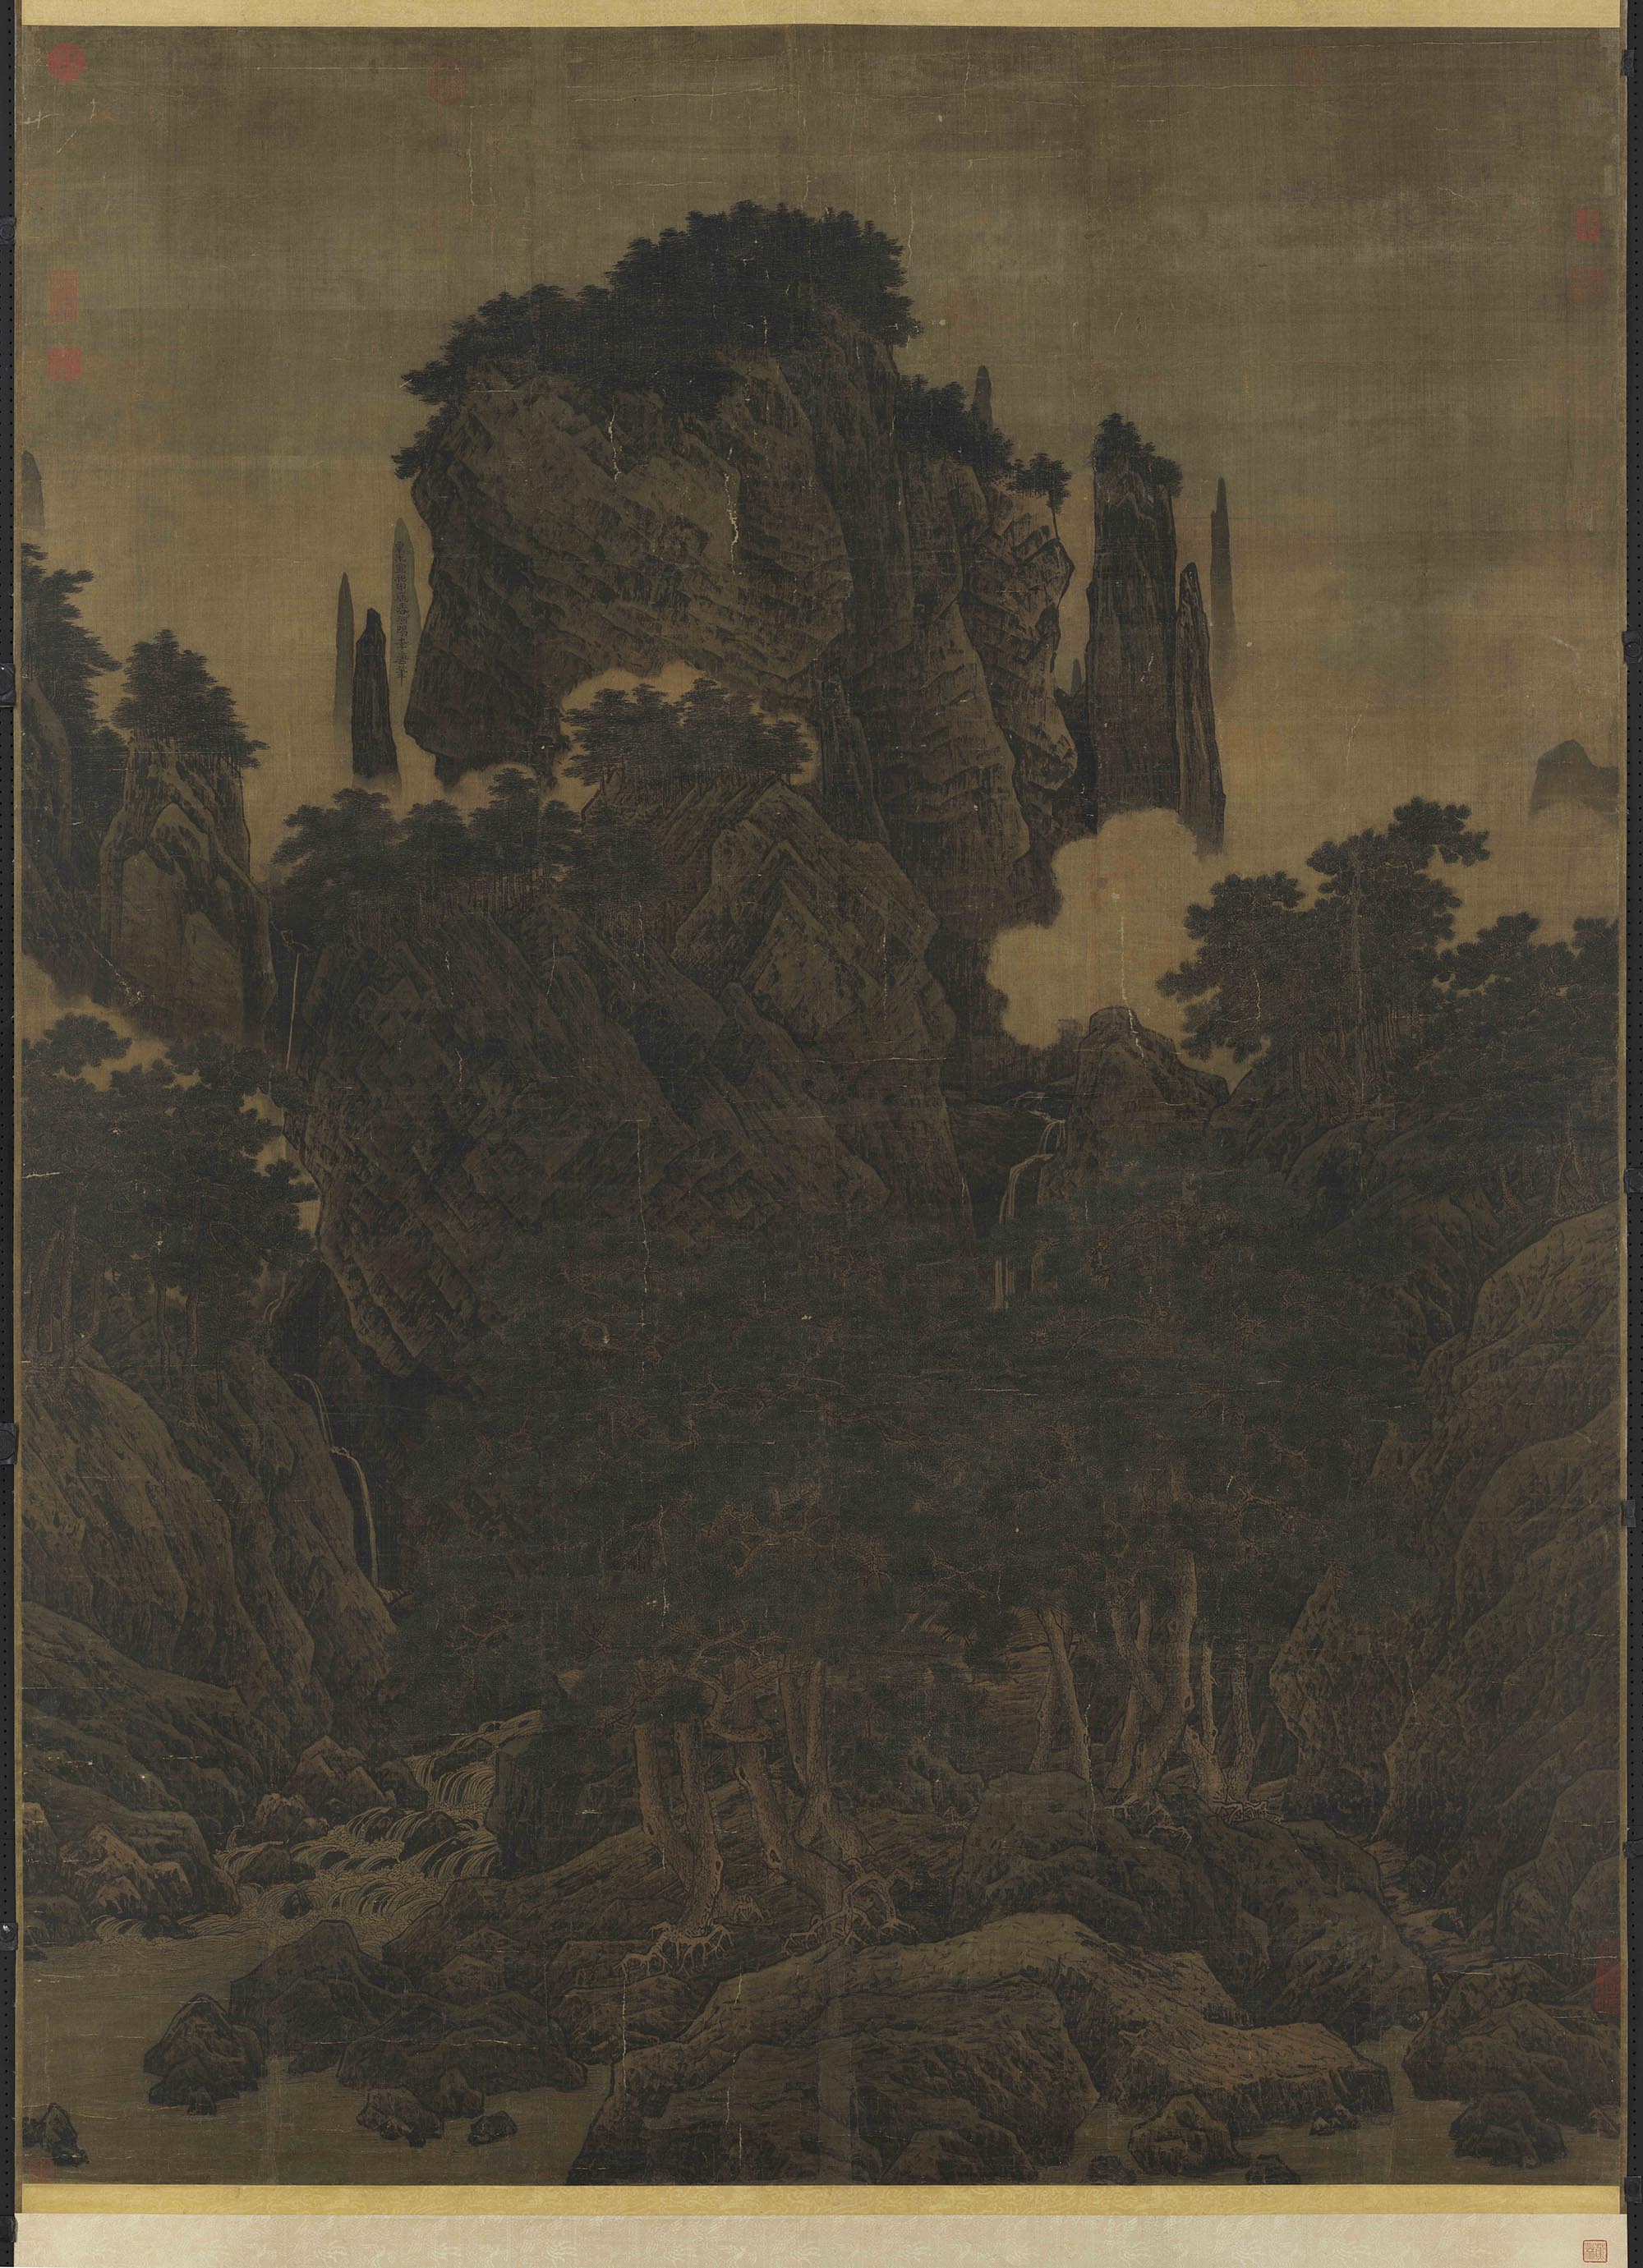 Whispering Pines in Myriad Valleys Li Tang (ca. 1049-after 1130), Song dynasty